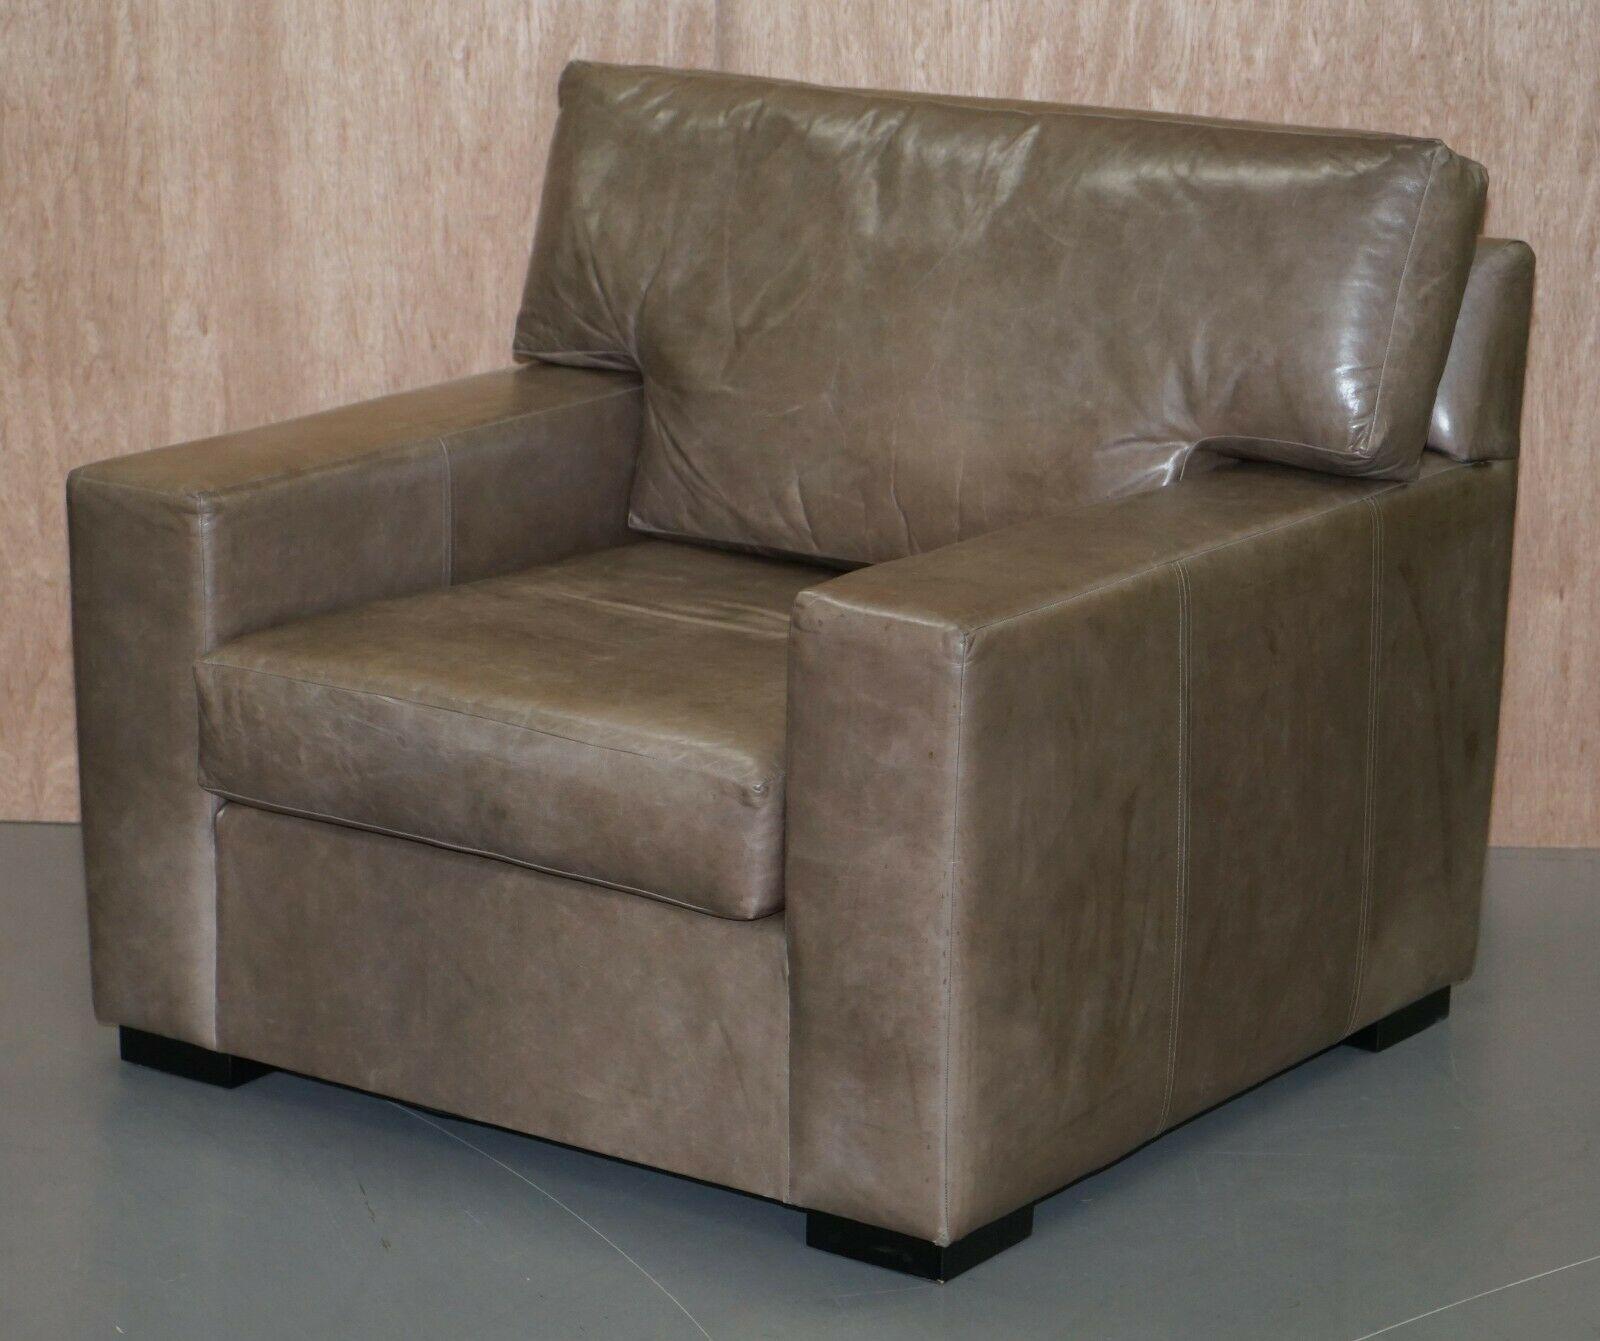 English Luxury Pair of Very Large Contemporary Grey Leather Armchairs or Love Seats For Sale